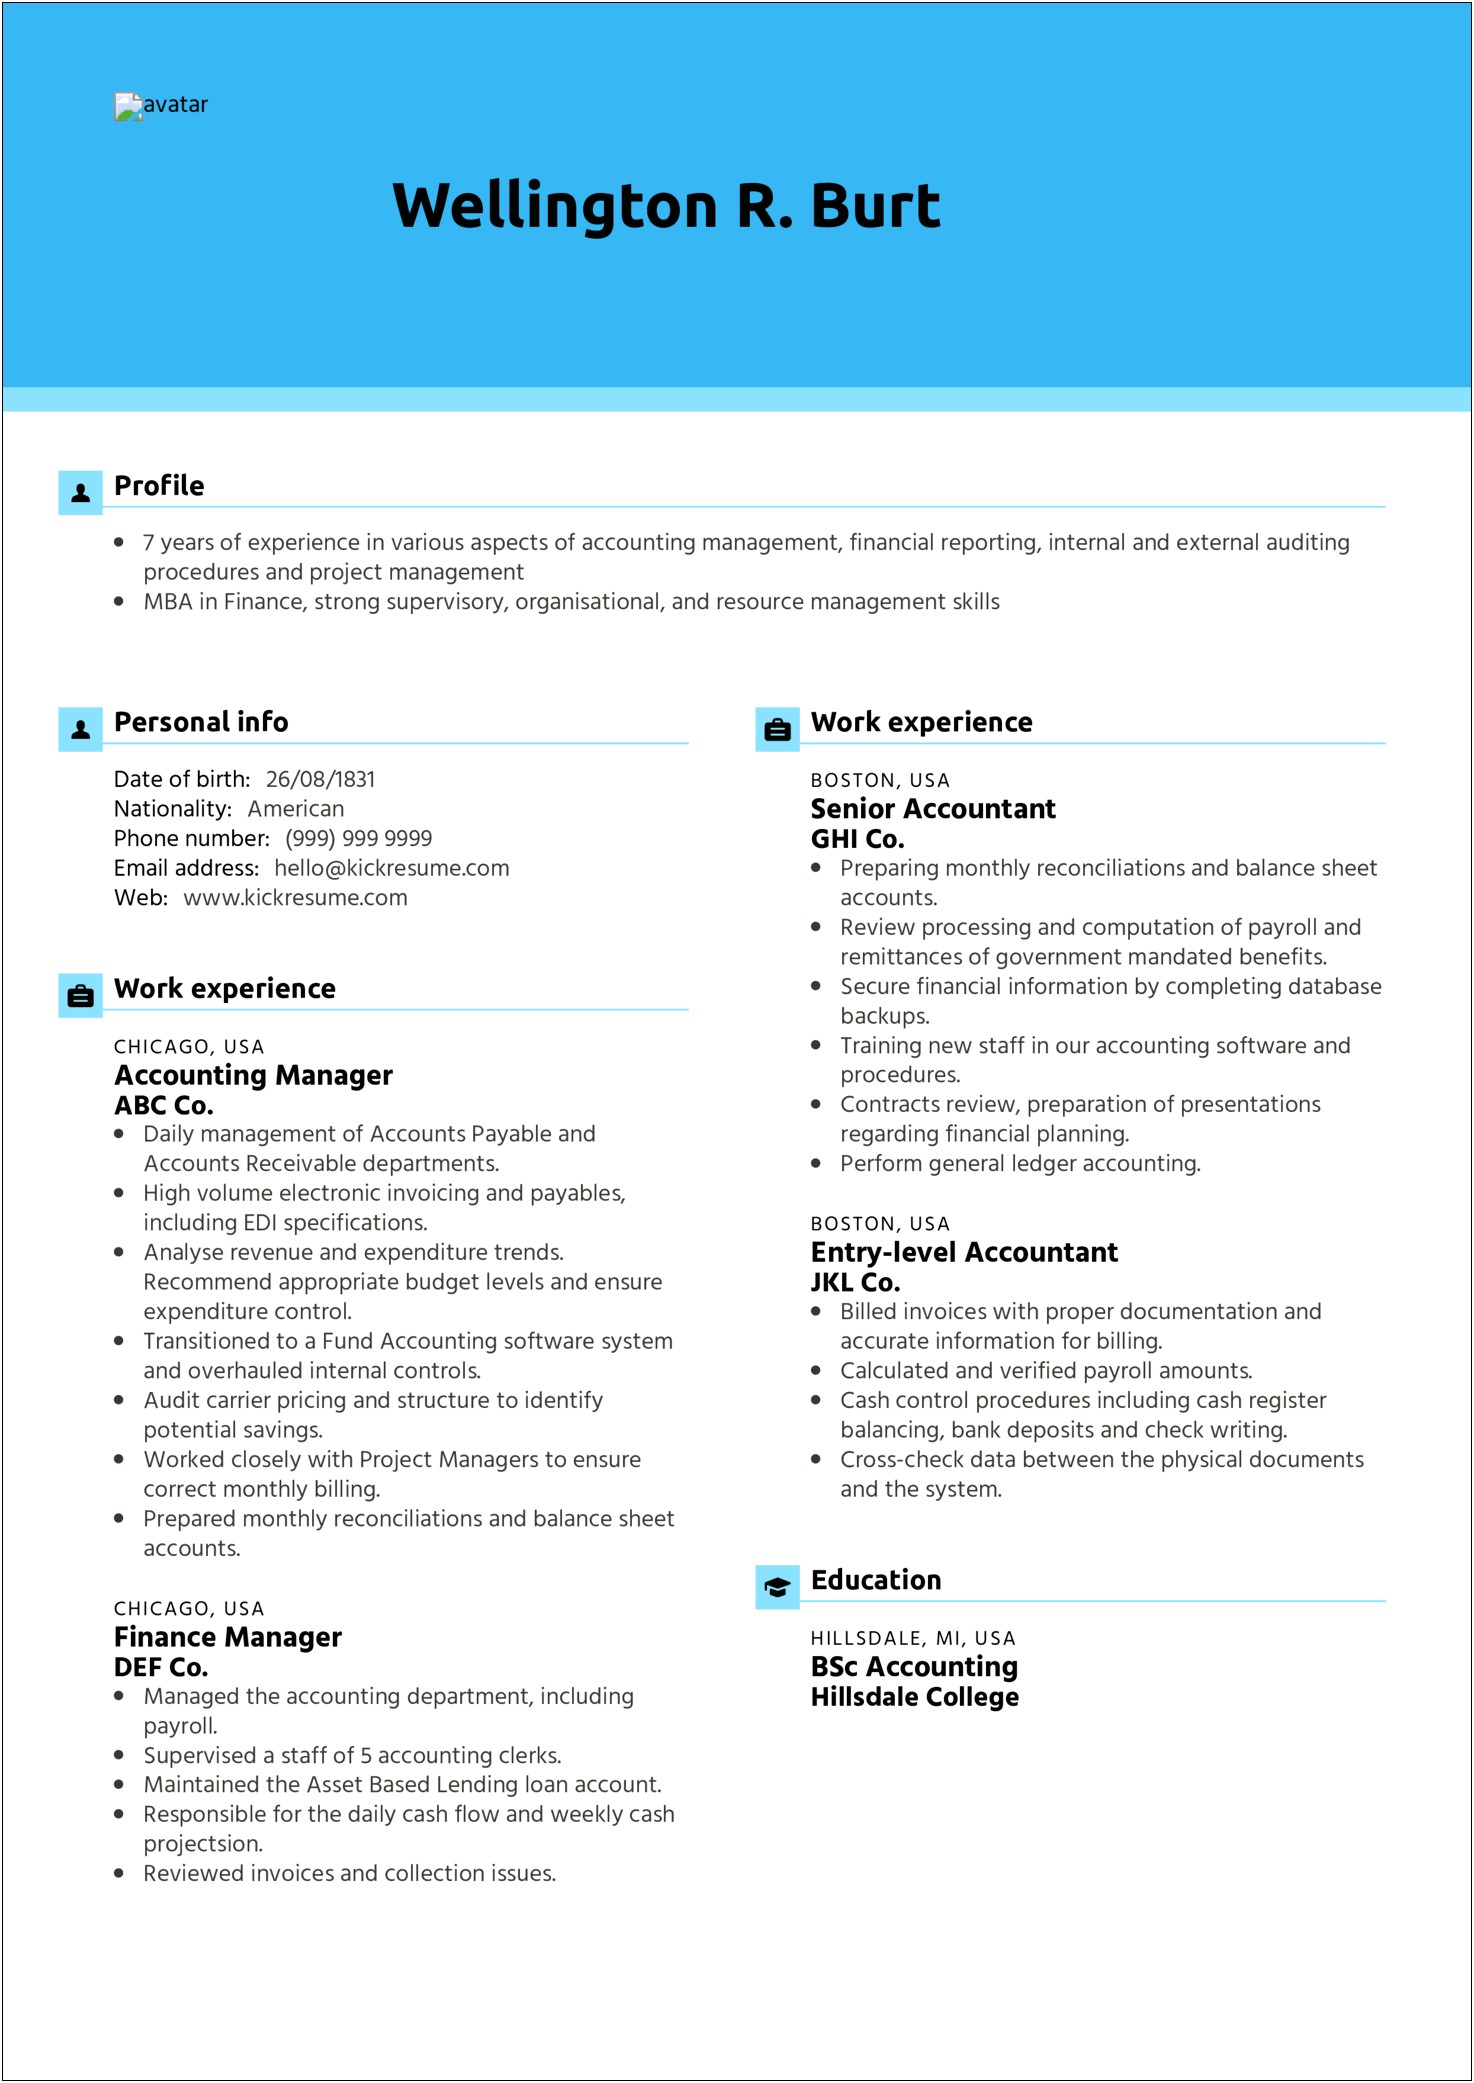 Sample Resume For Fund Accountants